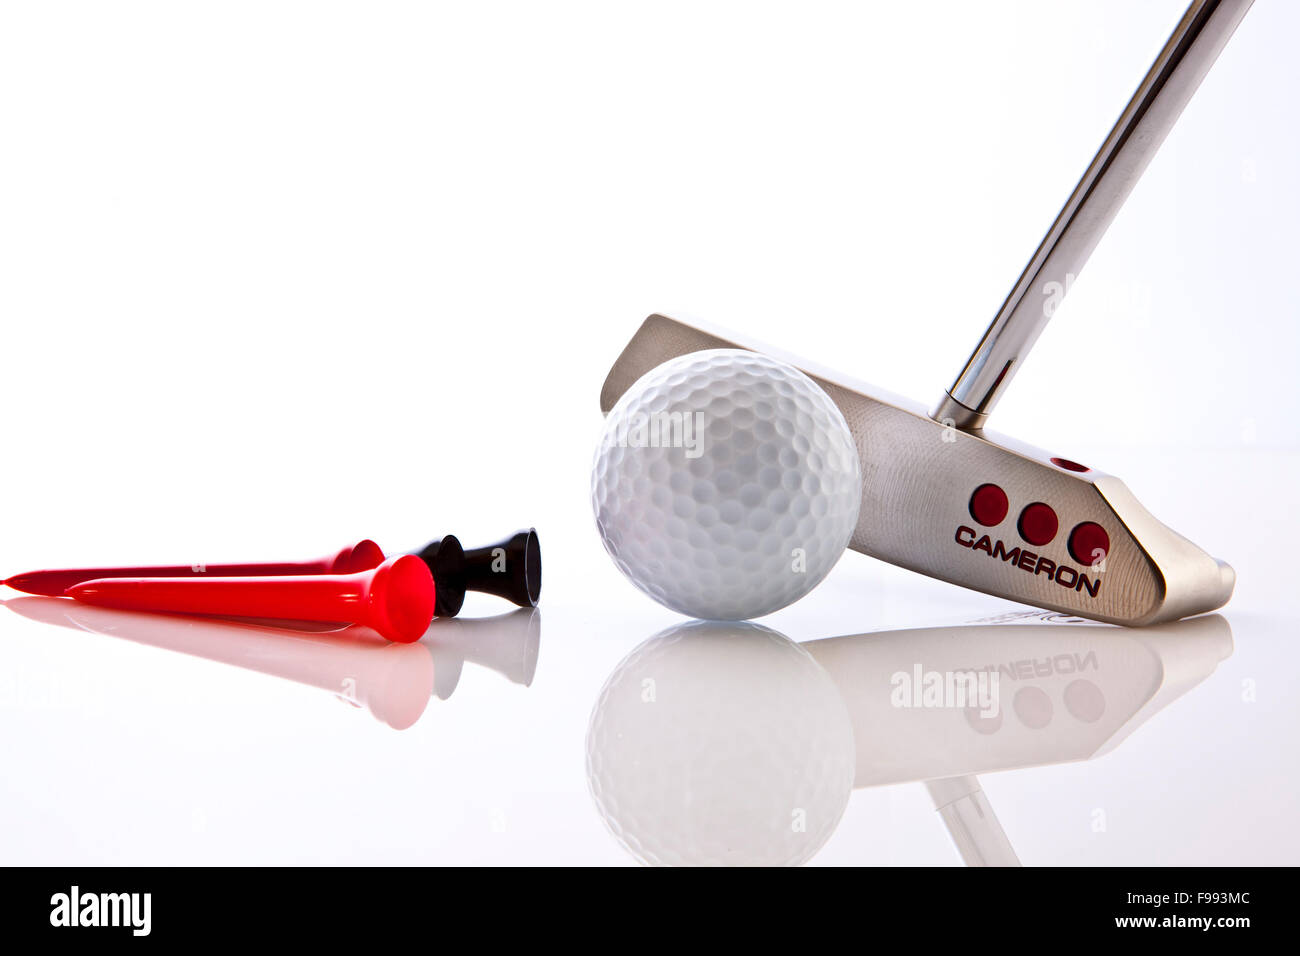 Scotty Cameron putter with Tees and Golf Ball on a White Background Stock Photo